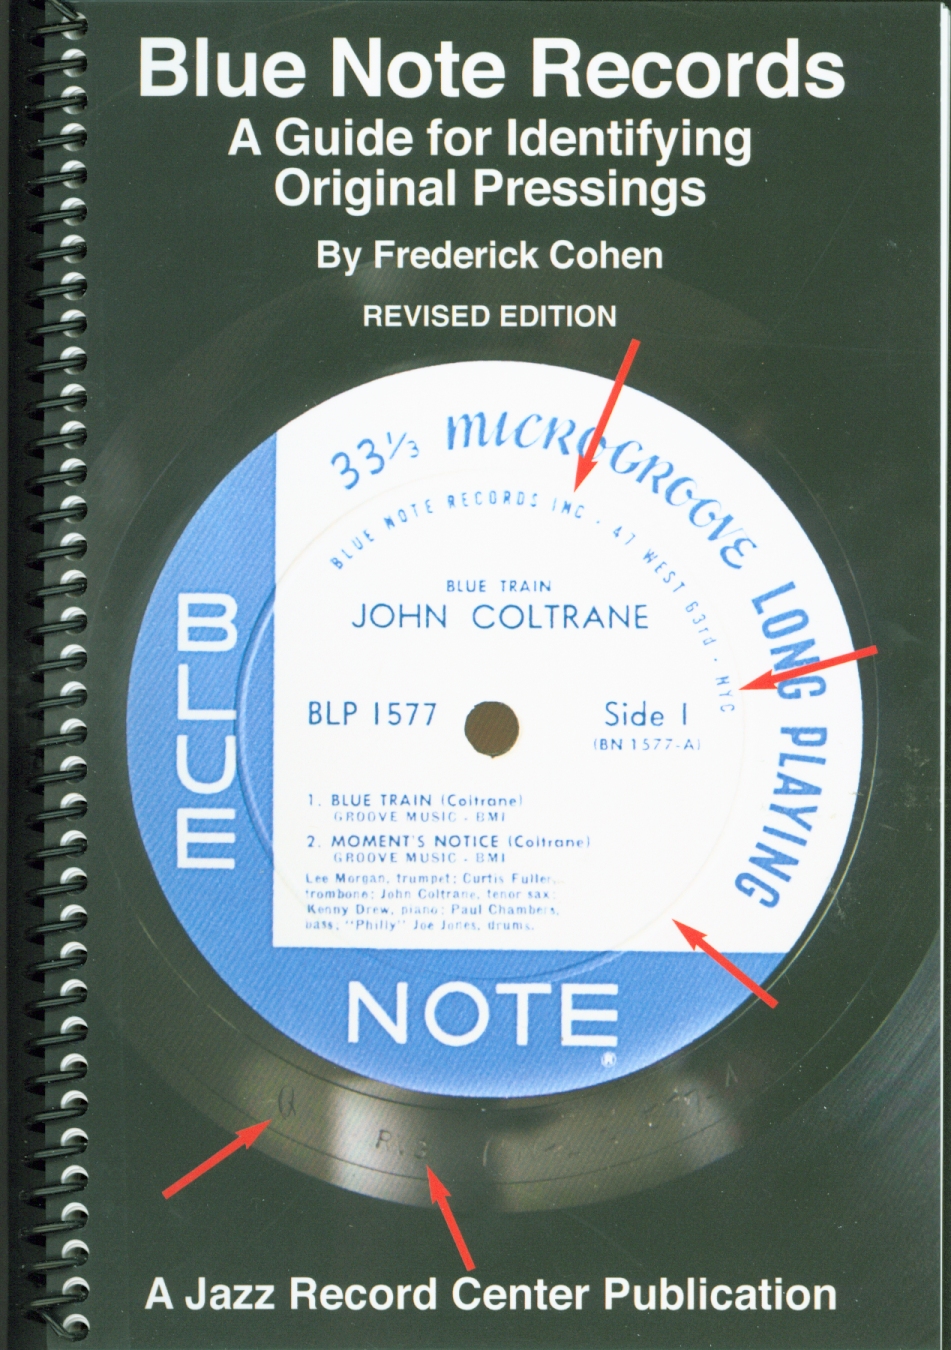 Blue Note Records by Frederick Cohen